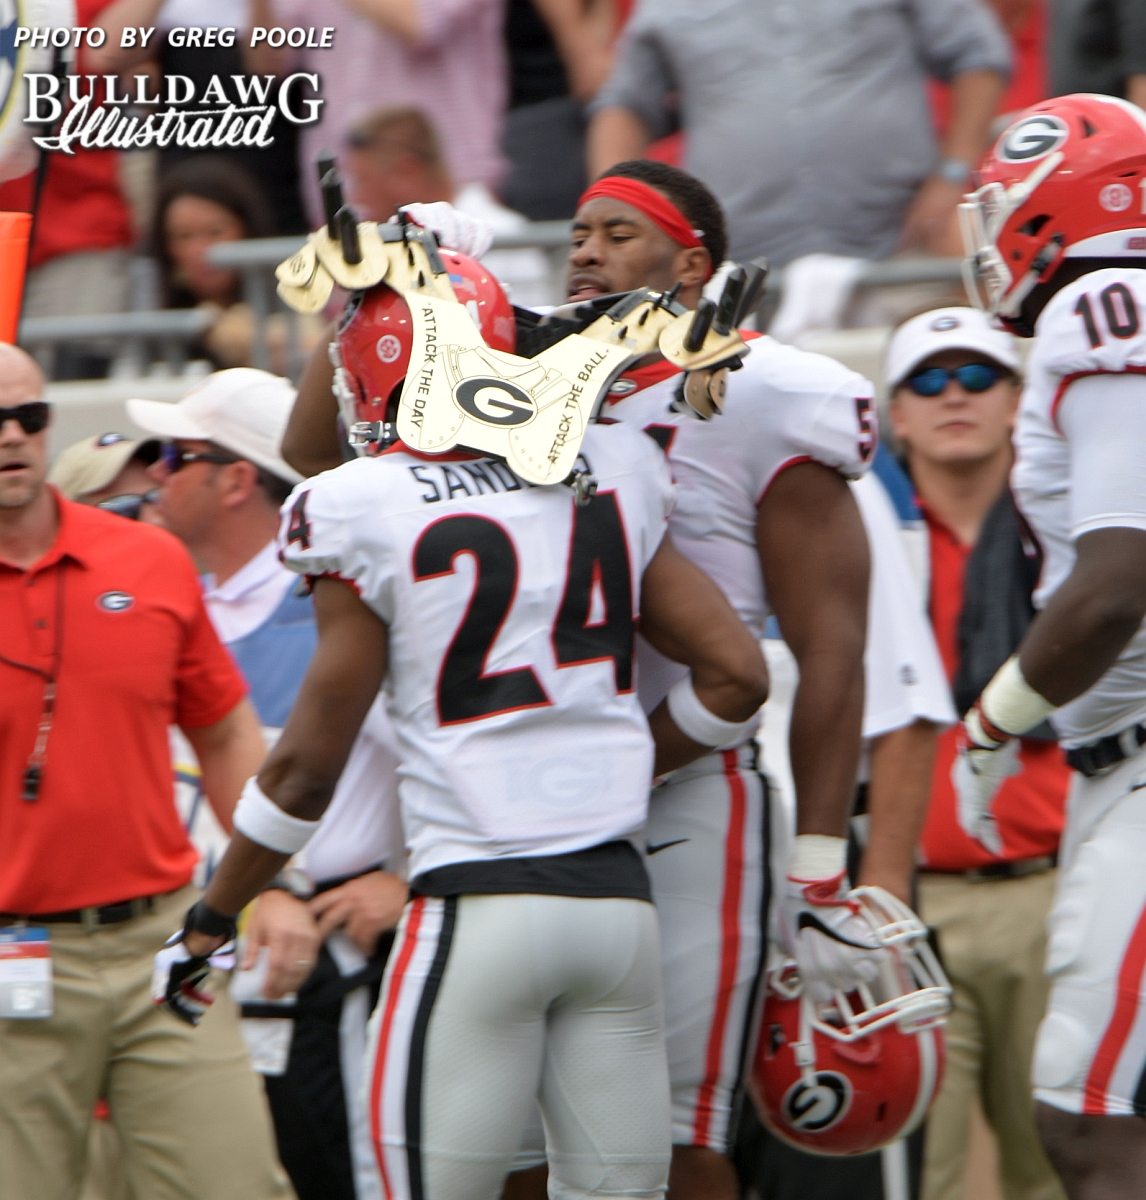 Dominick Sanders gets the 'golden spikes' after nabbing his 15th career interception during the Georgia-Florida game on Saturday, Oct. 28, 2017